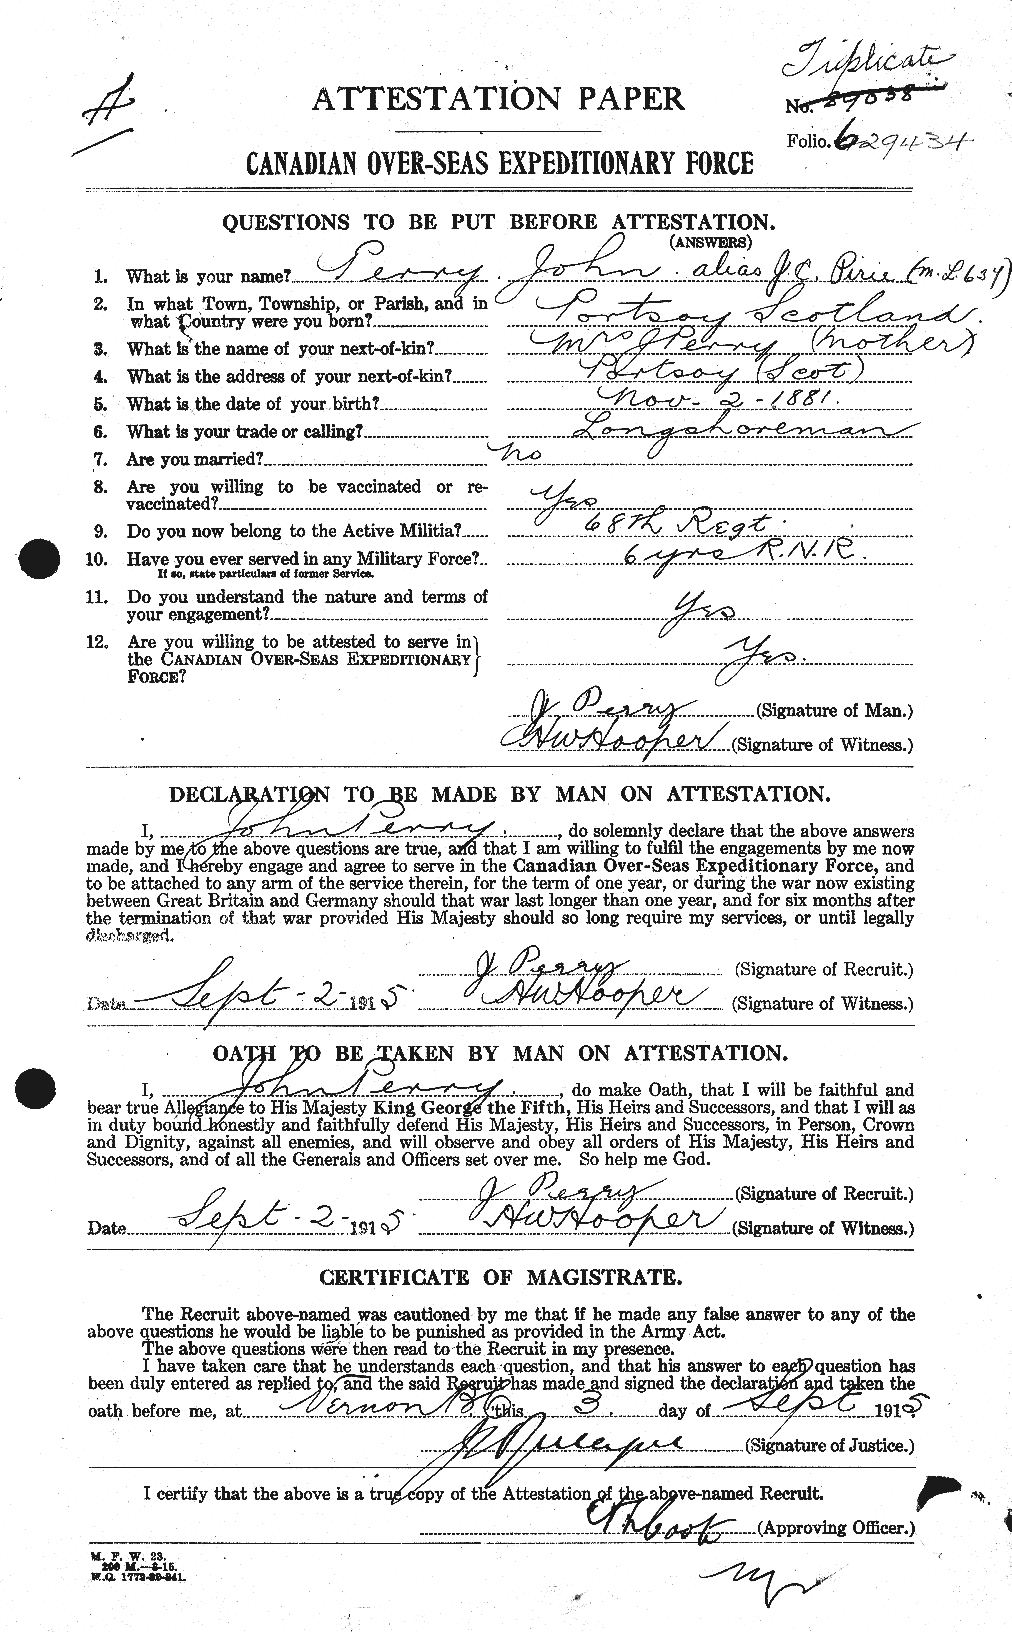 Personnel Records of the First World War - CEF 574933a